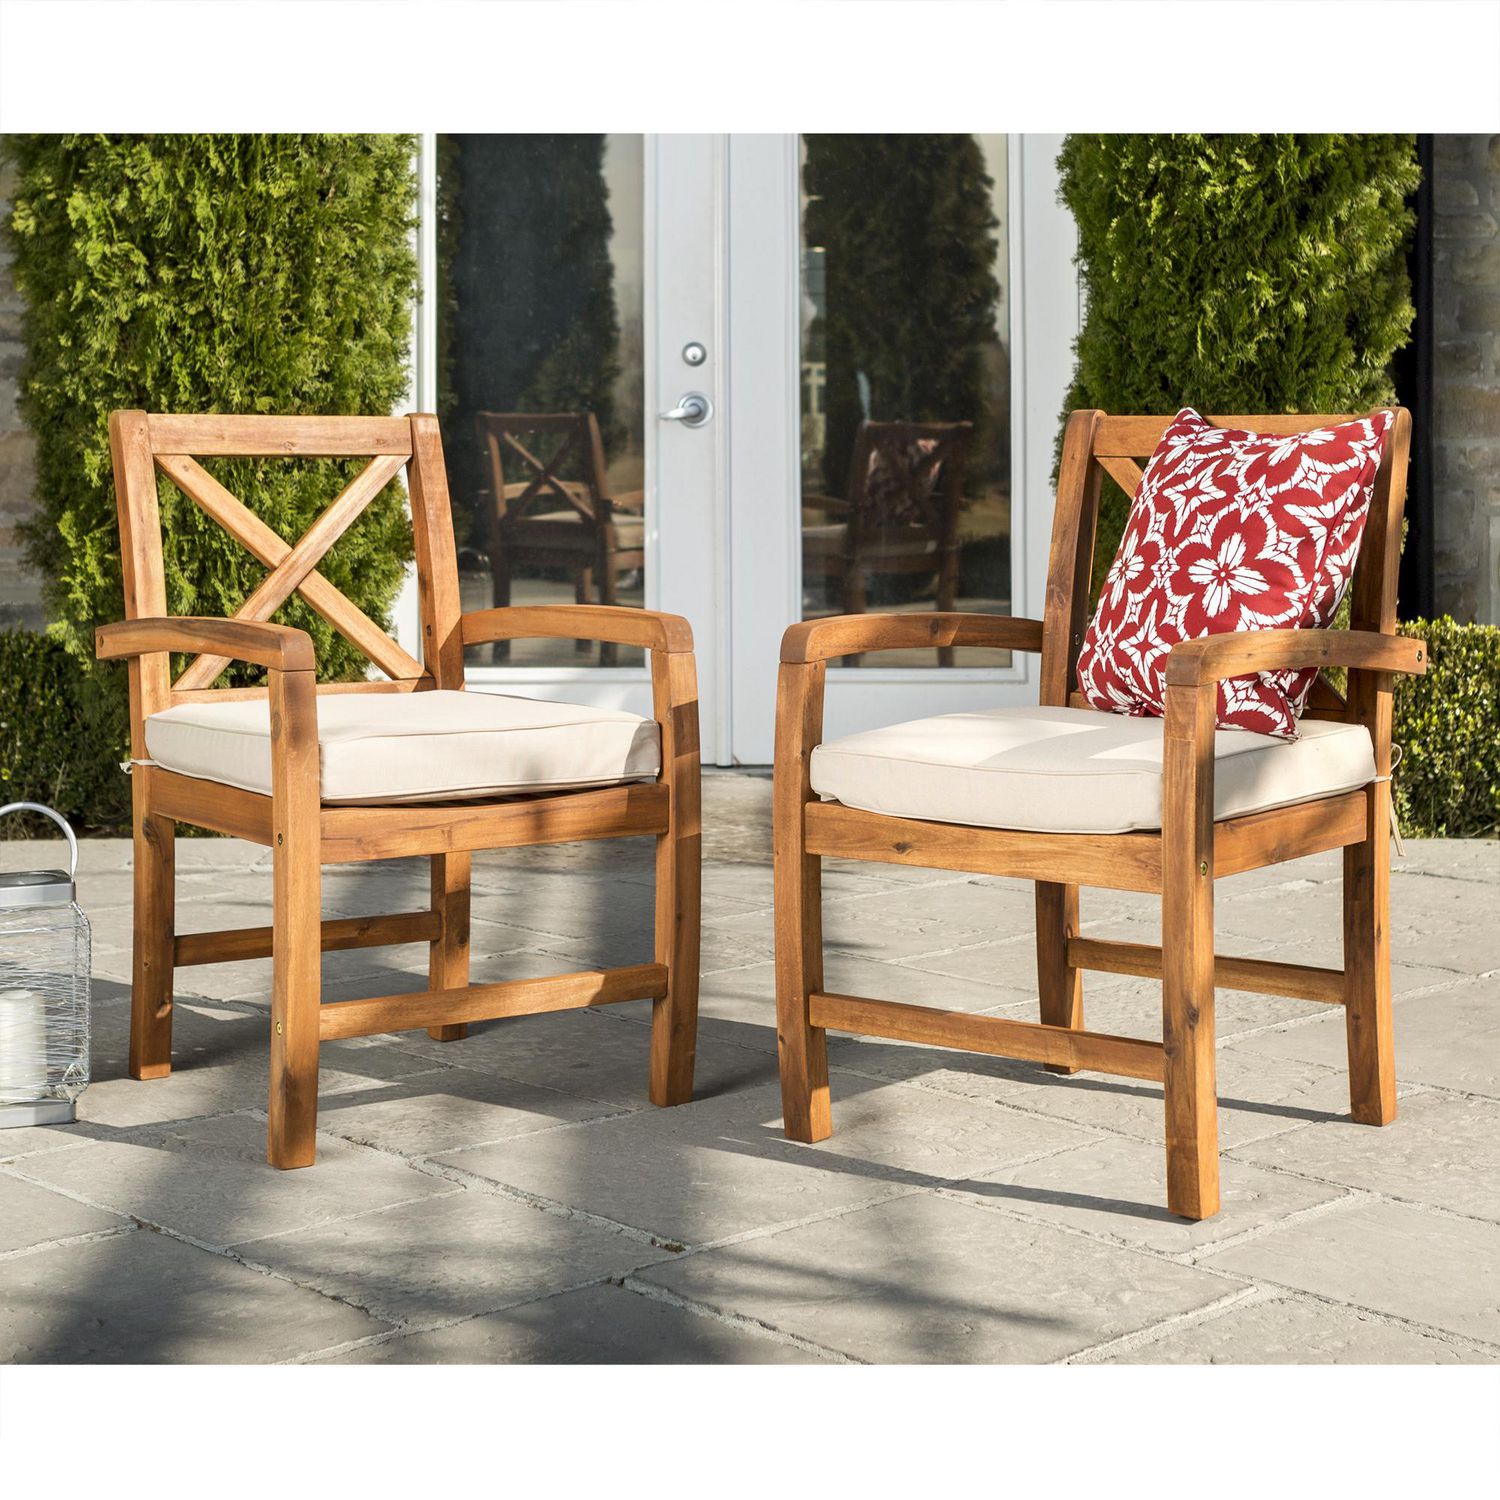 Manor Park Wood X Back Outdoor Patio, Outdoor Wooden Chairs With Cushions